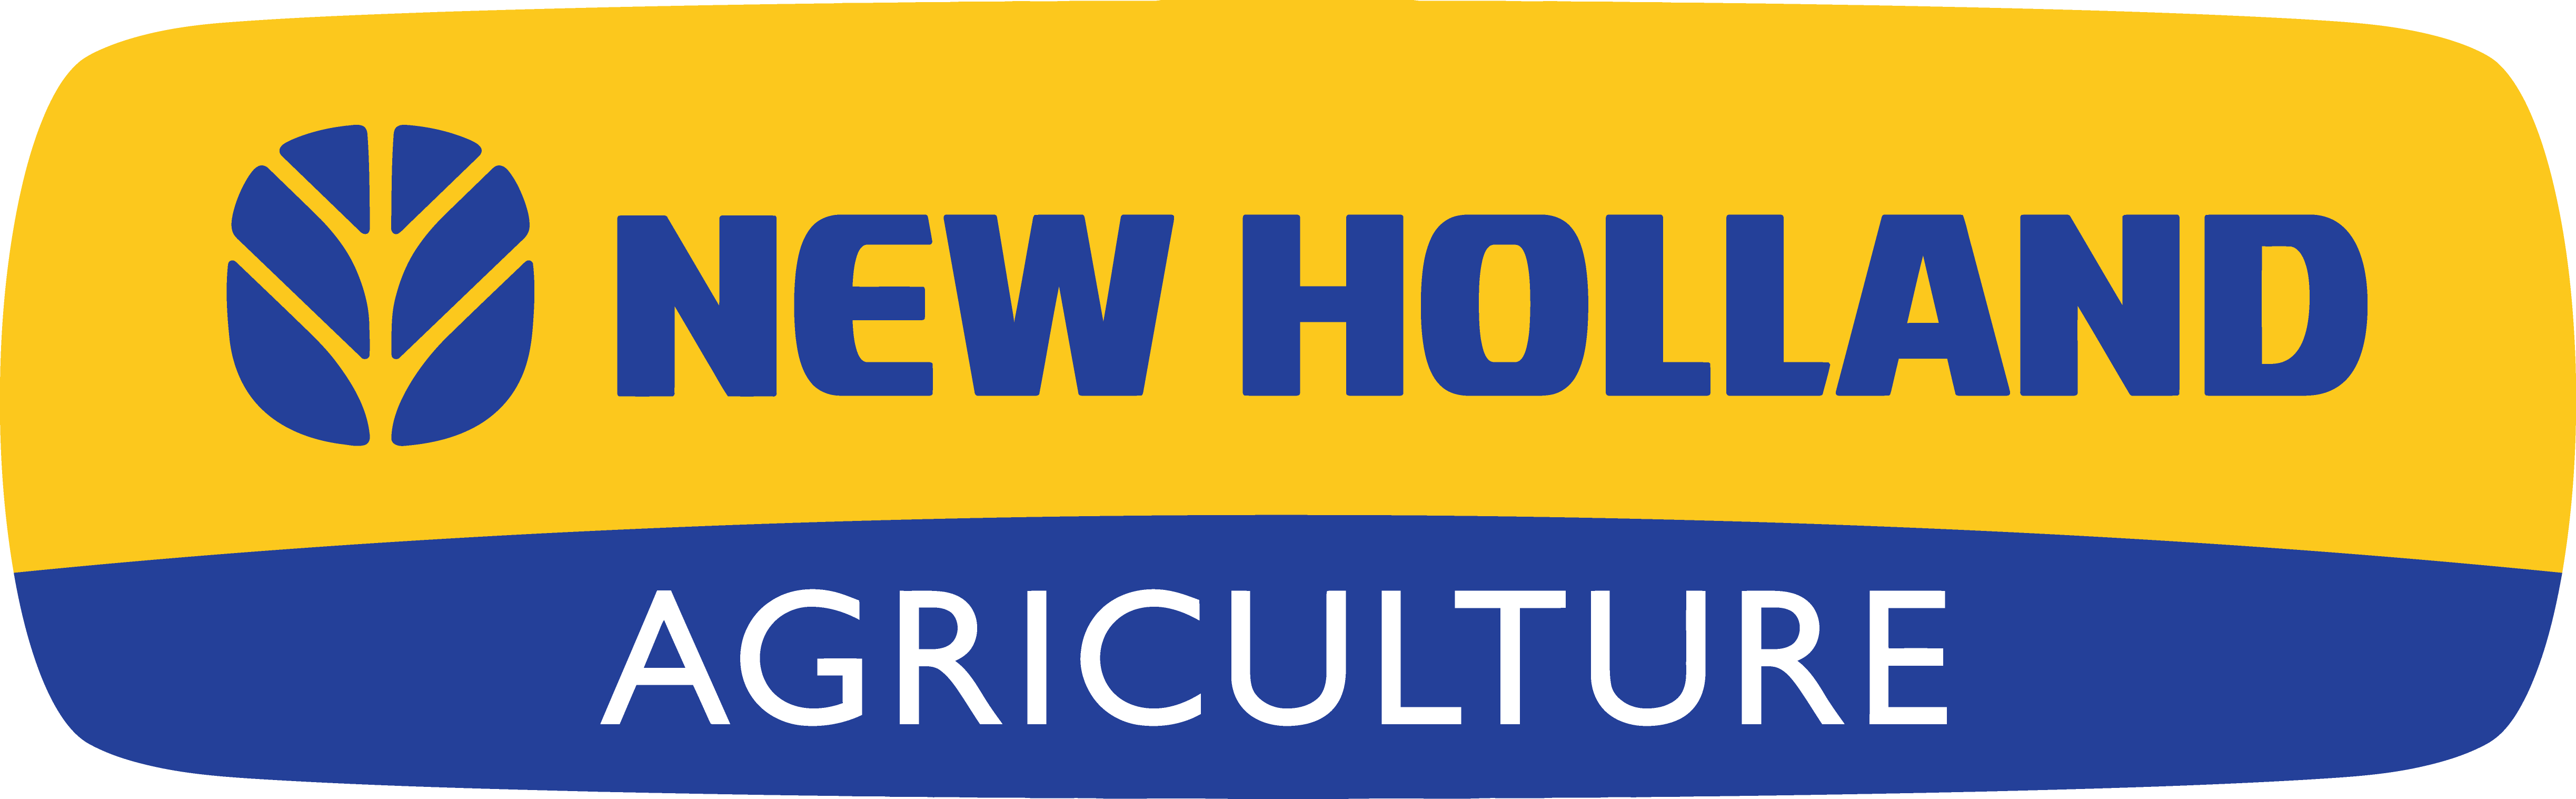 Ford New Holland Logo - New Holland Agriculture | uiuyiyu